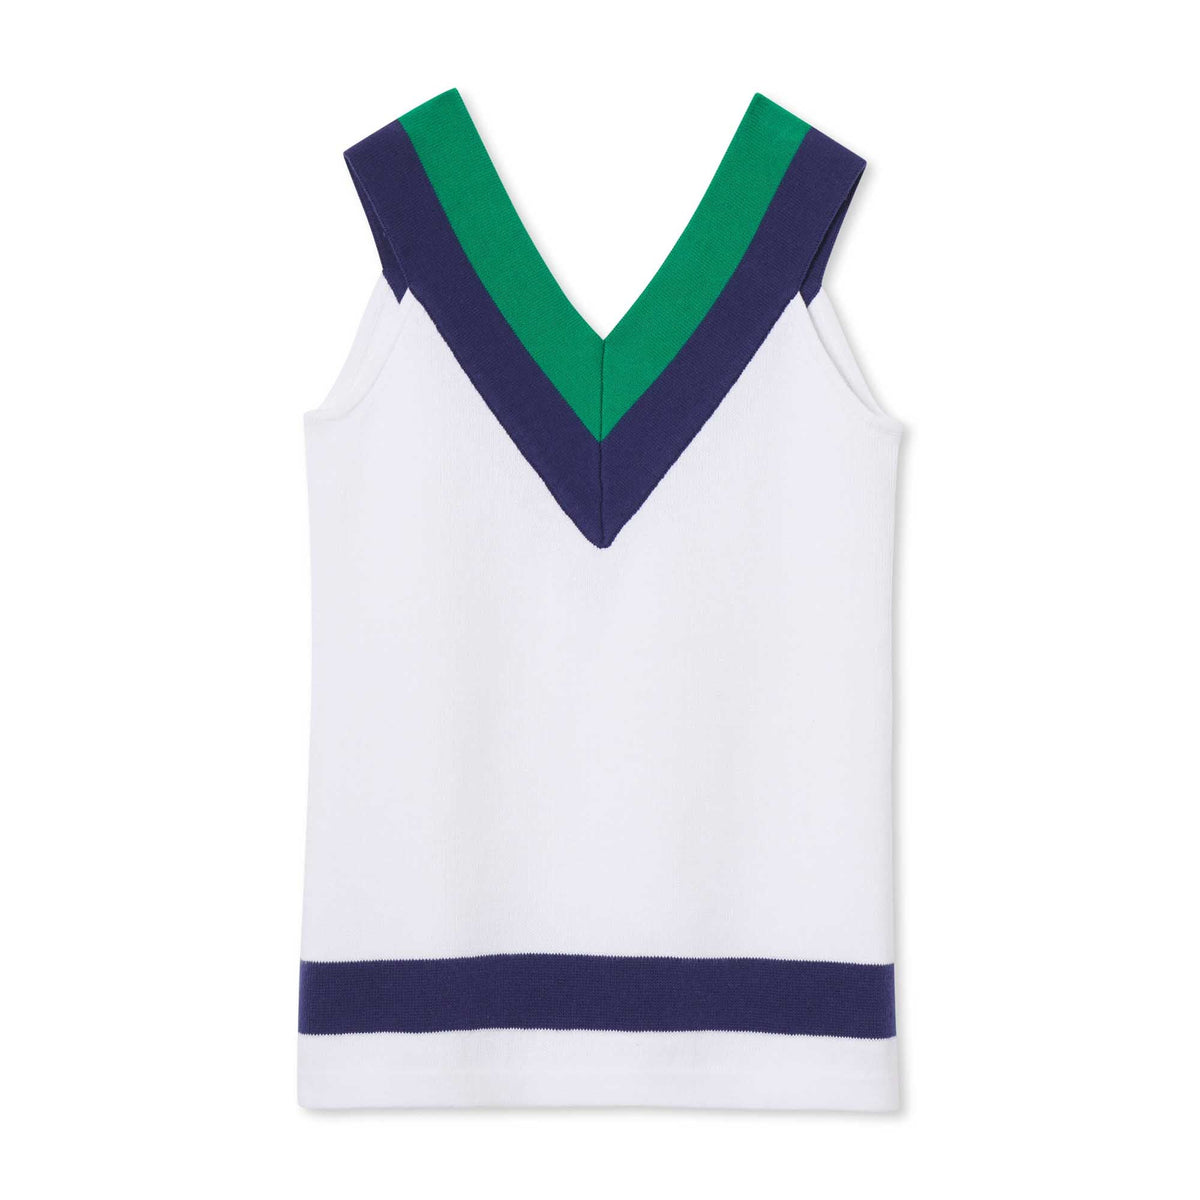 Classic and Preppy Trinity Tennis Sweater Dress, Bright White-Dresses, Jumpsuits and Rompers-Bright White-5Y-CPC - Classic Prep Childrenswear